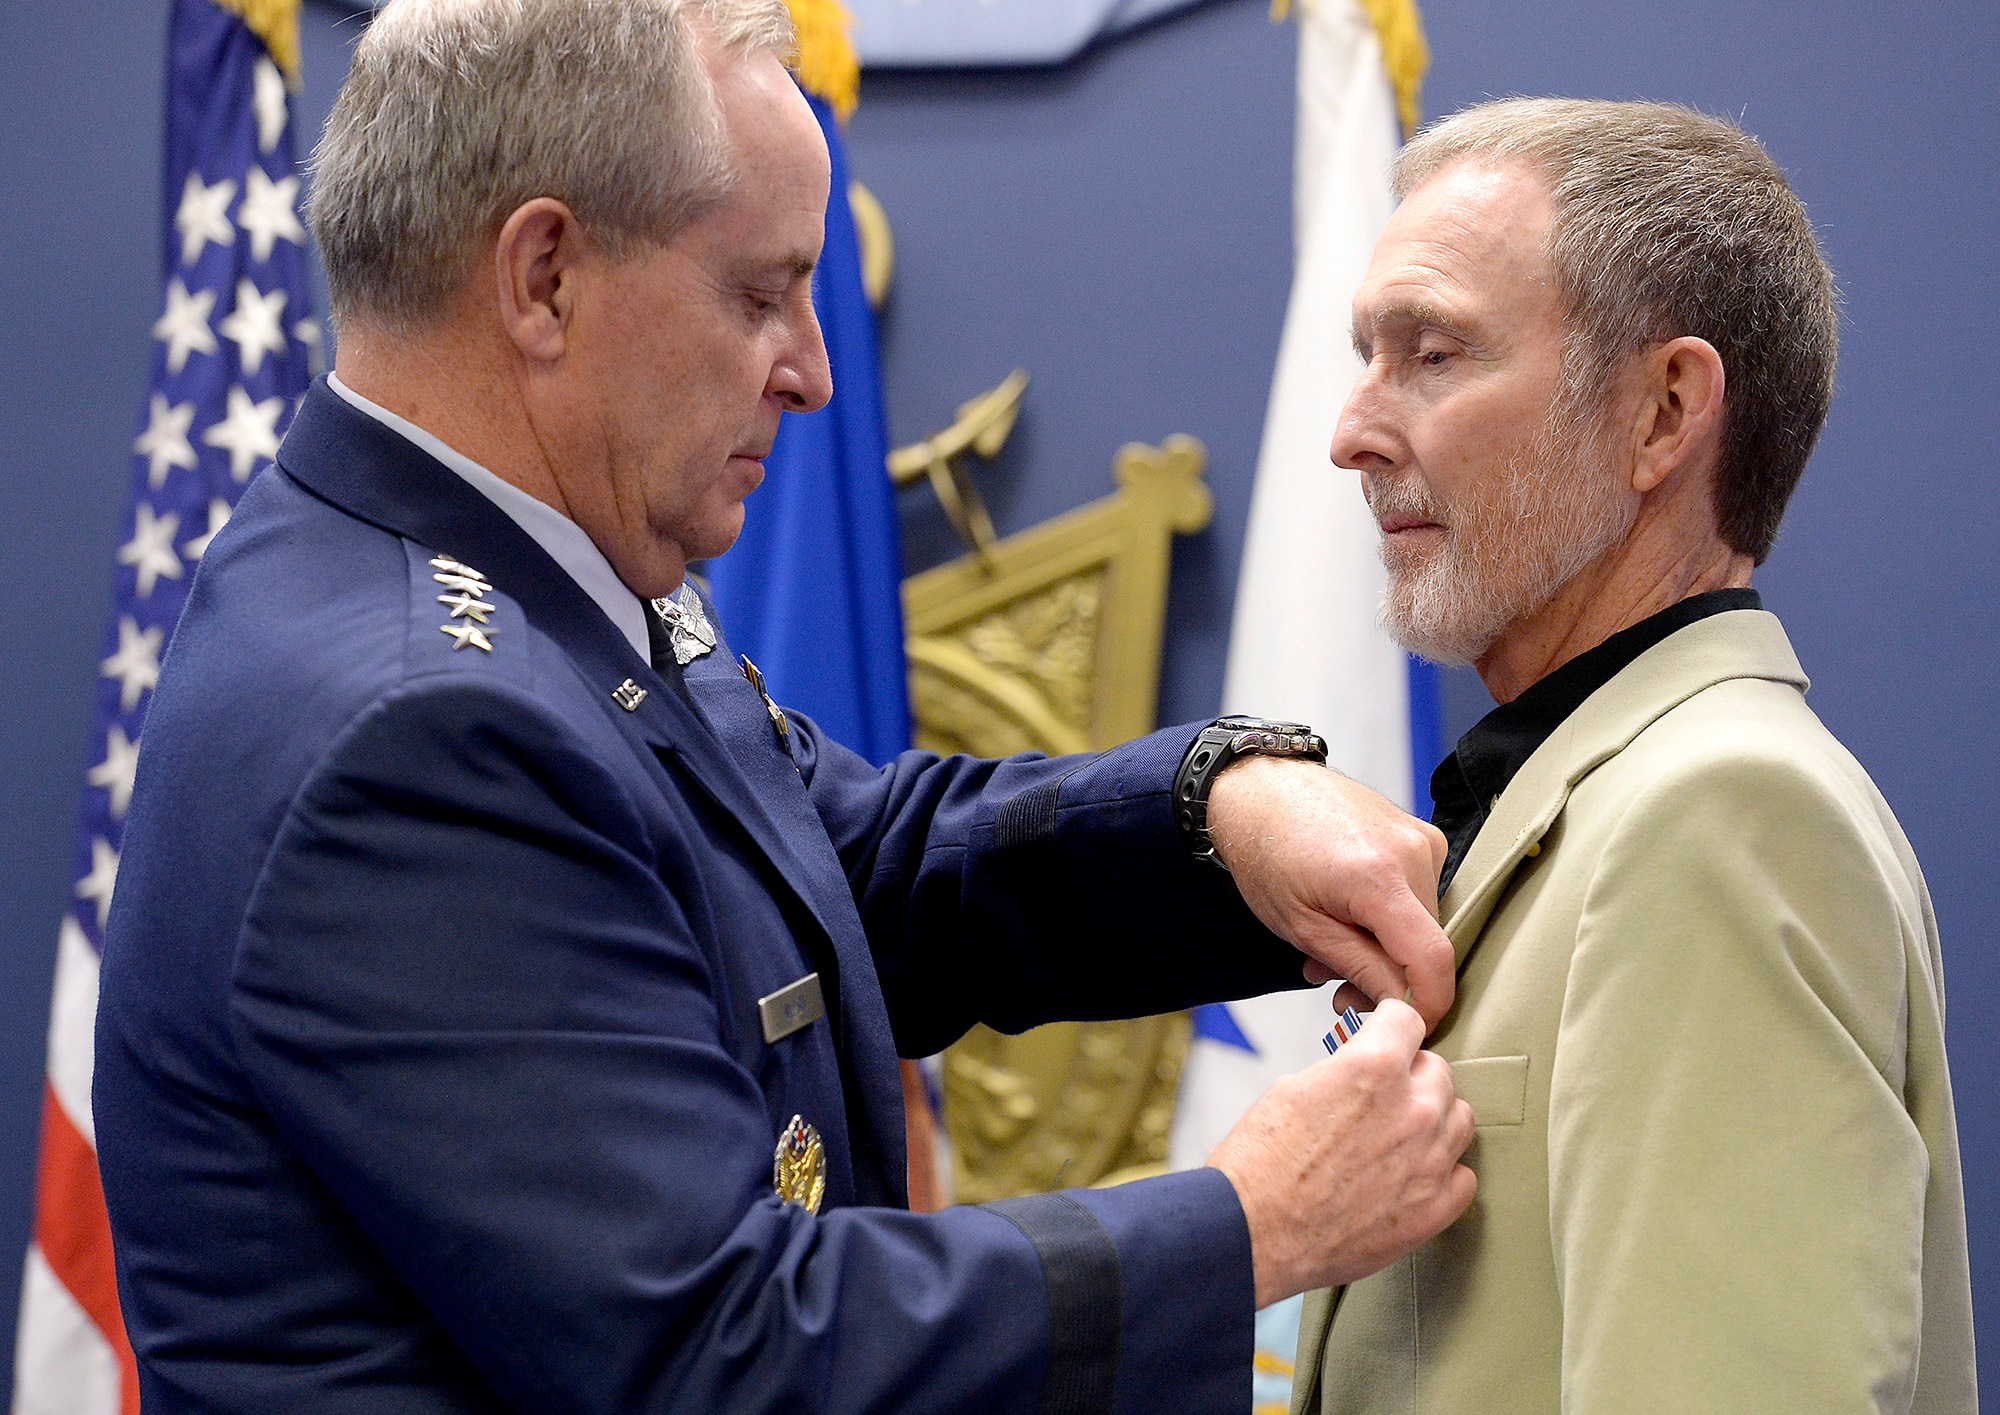 Air Force Chief of Staff Gen. Mark A. Welsh III pins the Silver Star to Eric L. Roberts II during a ceremony at the Pentagon in Washington D.C., Dec. 17, 2015. Roberts received the medal for his gallant action in Vietnam. (U.S. Air Force photo/Scott M. Ash)